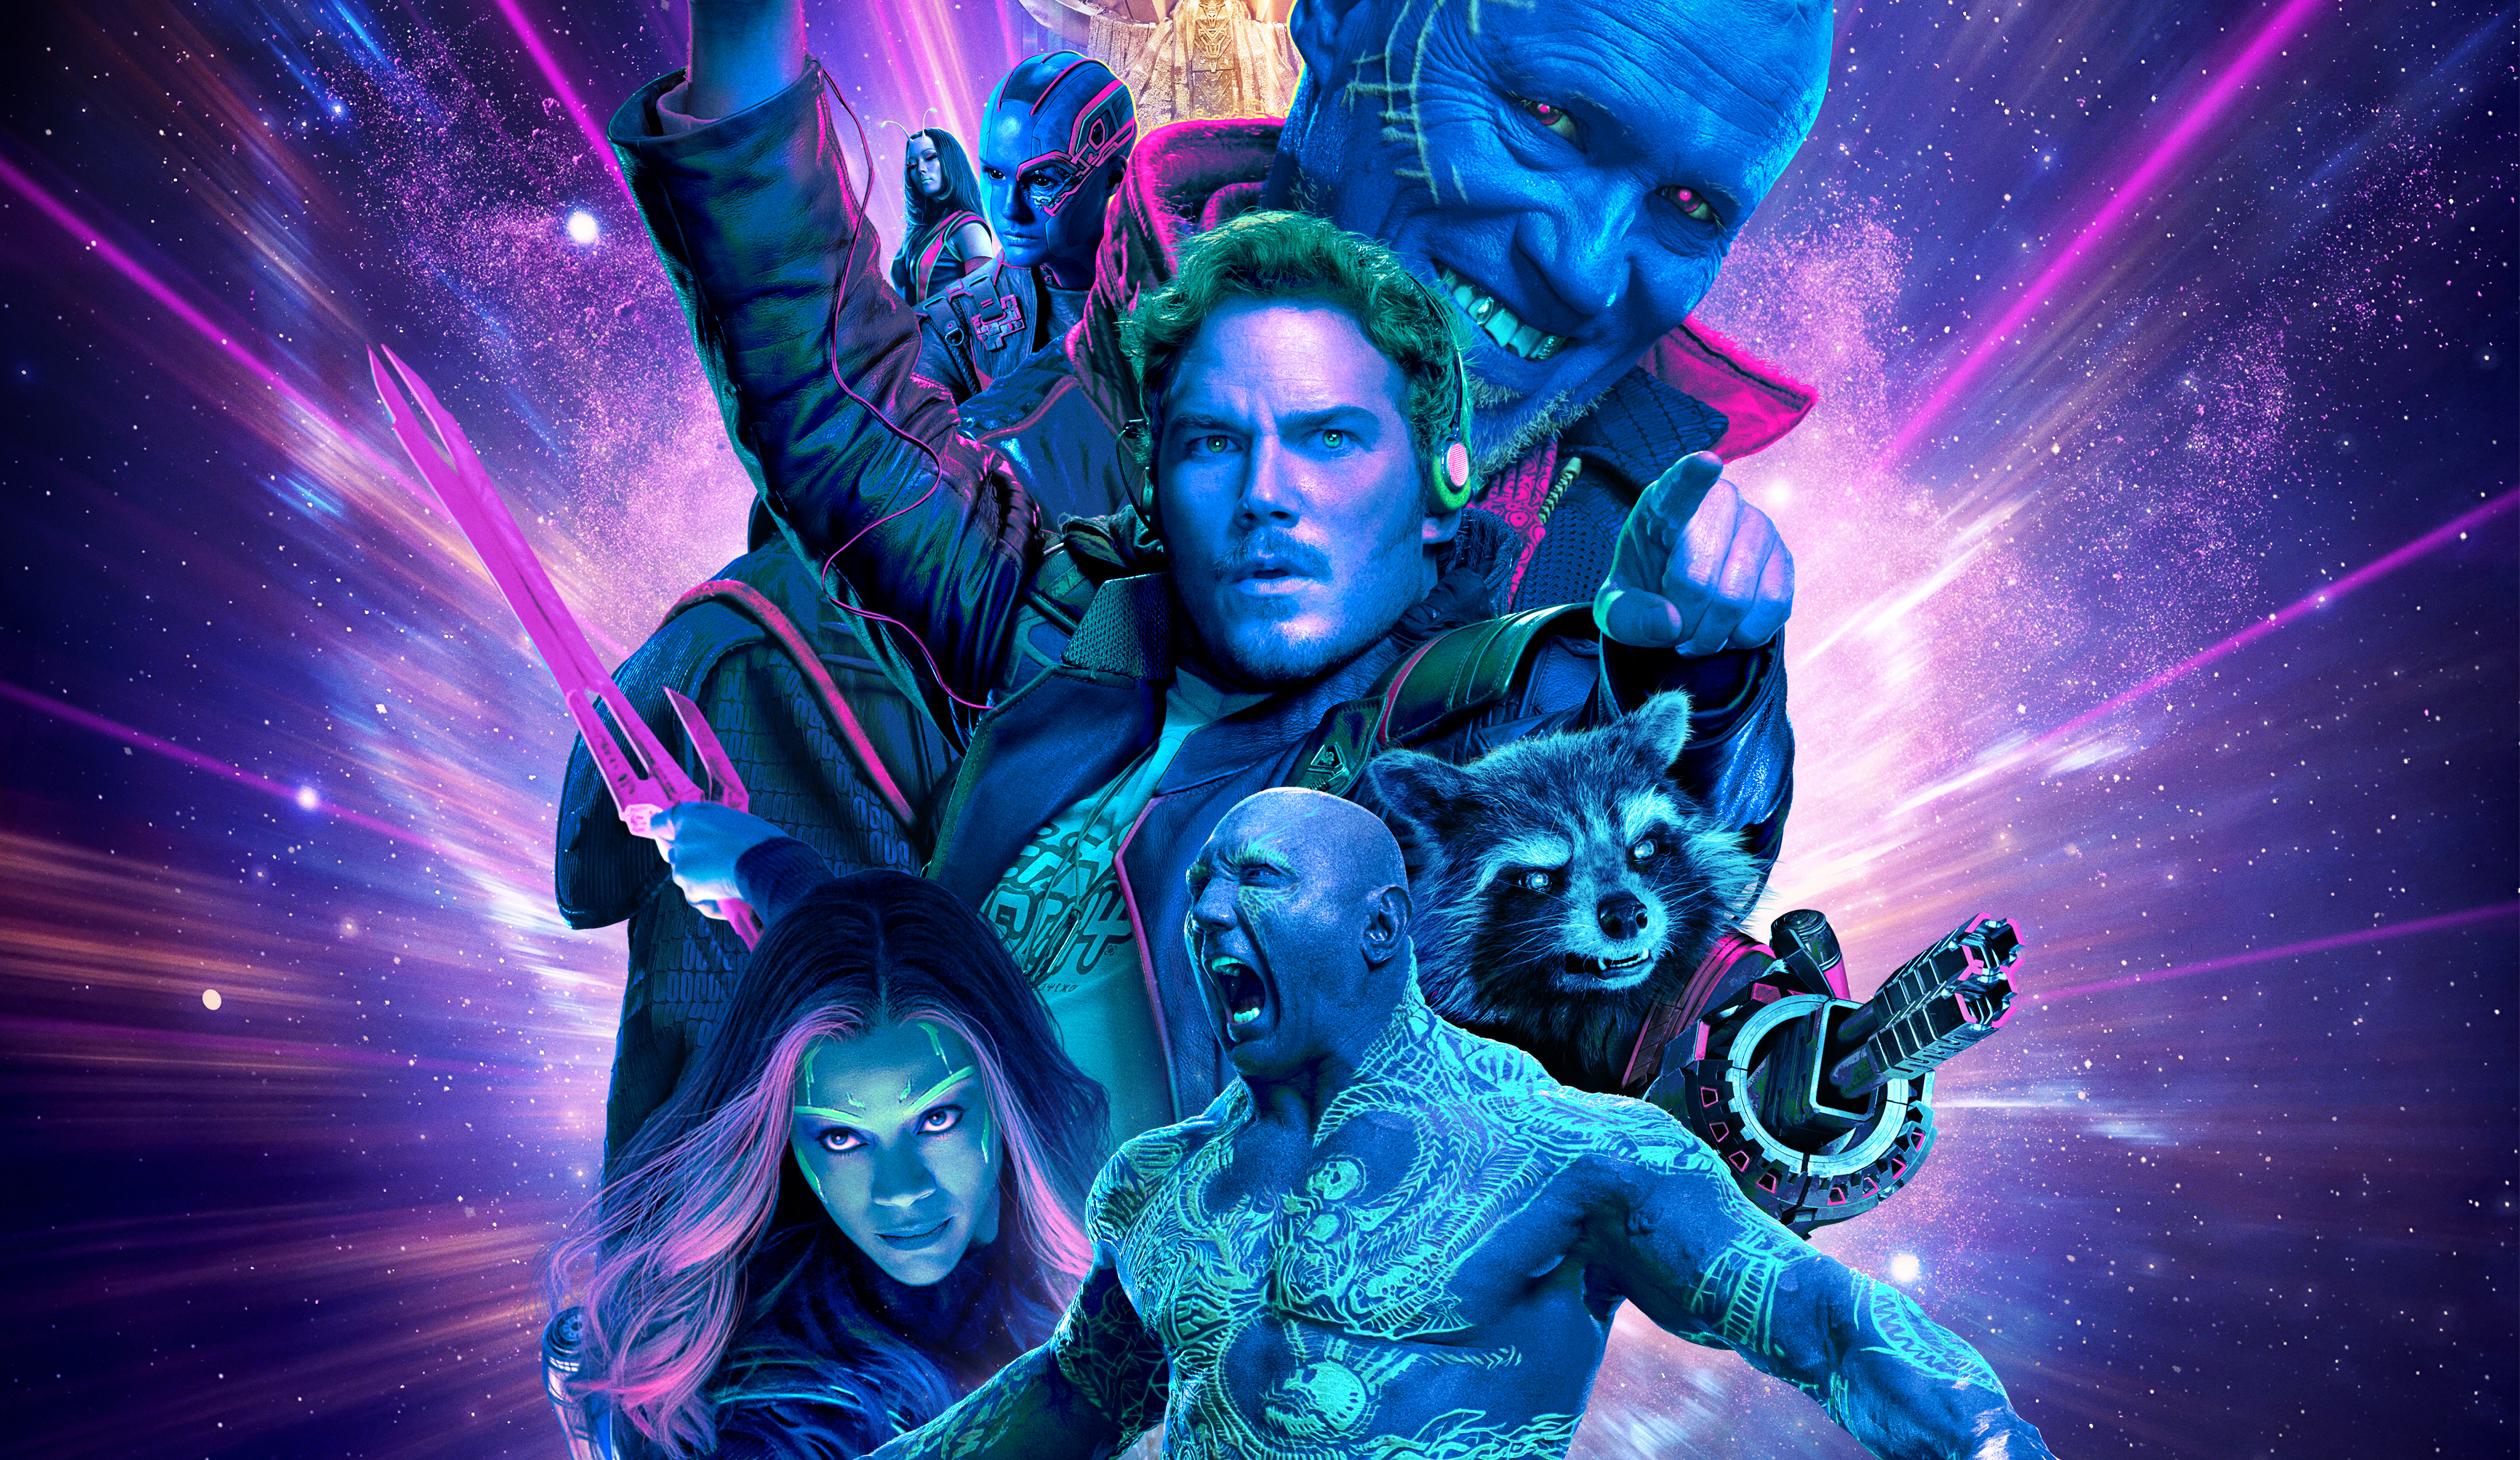 instal the last version for iphoneGuardians of the Galaxy Vol 2